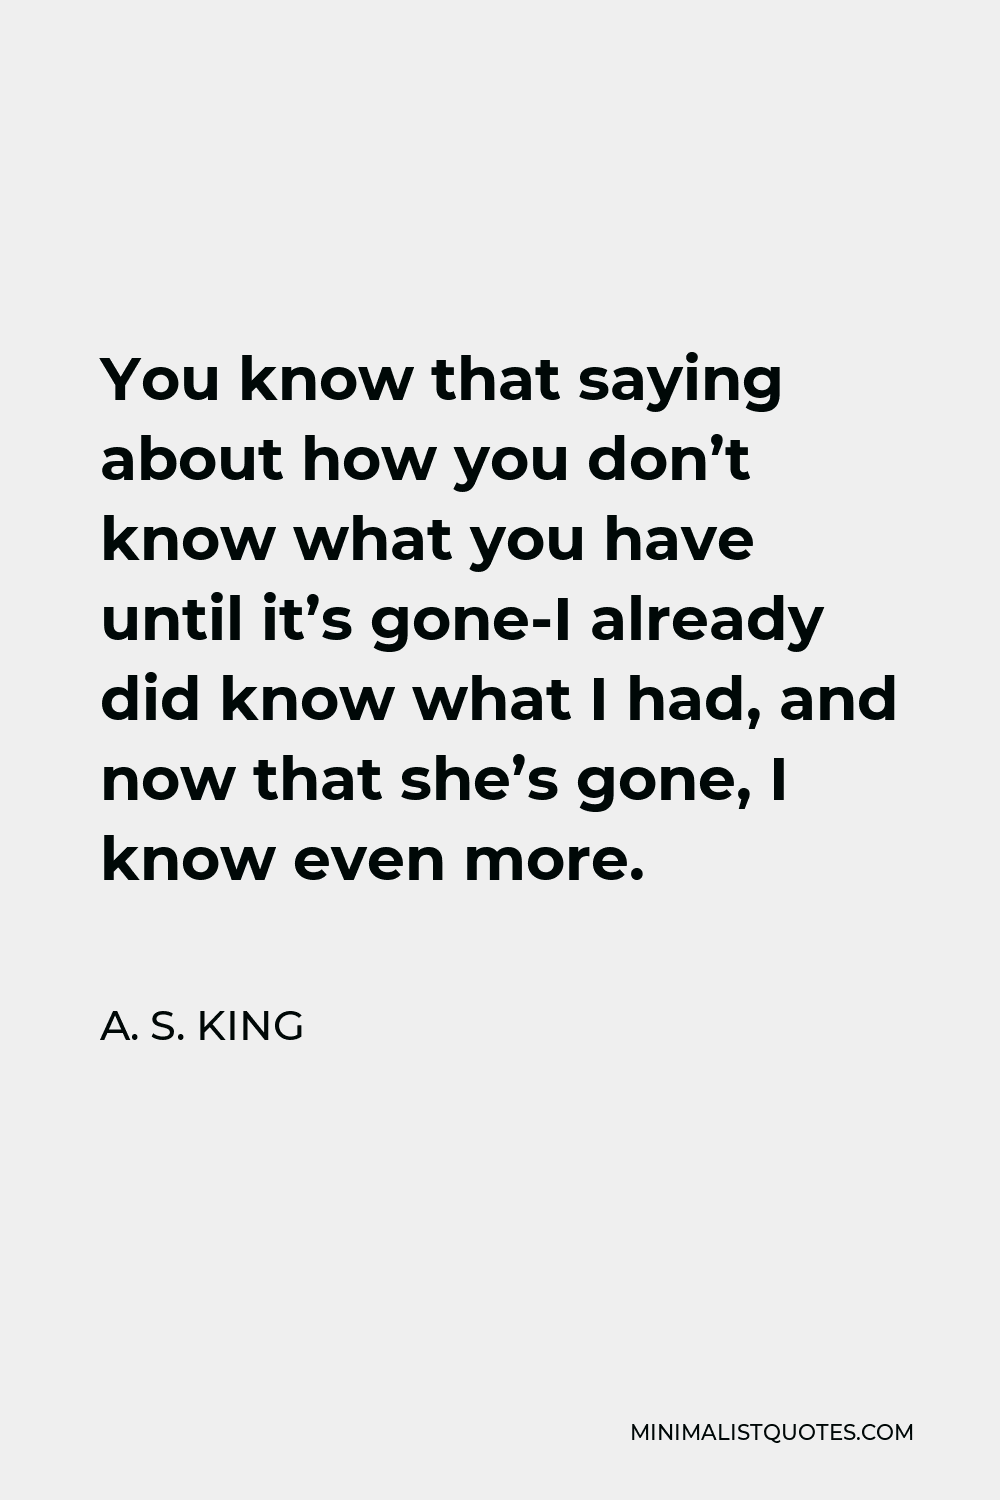 A. S. King Quote - You know that saying about how you don’t know what you have until it’s gone-I already did know what I had, and now that she’s gone, I know even more.